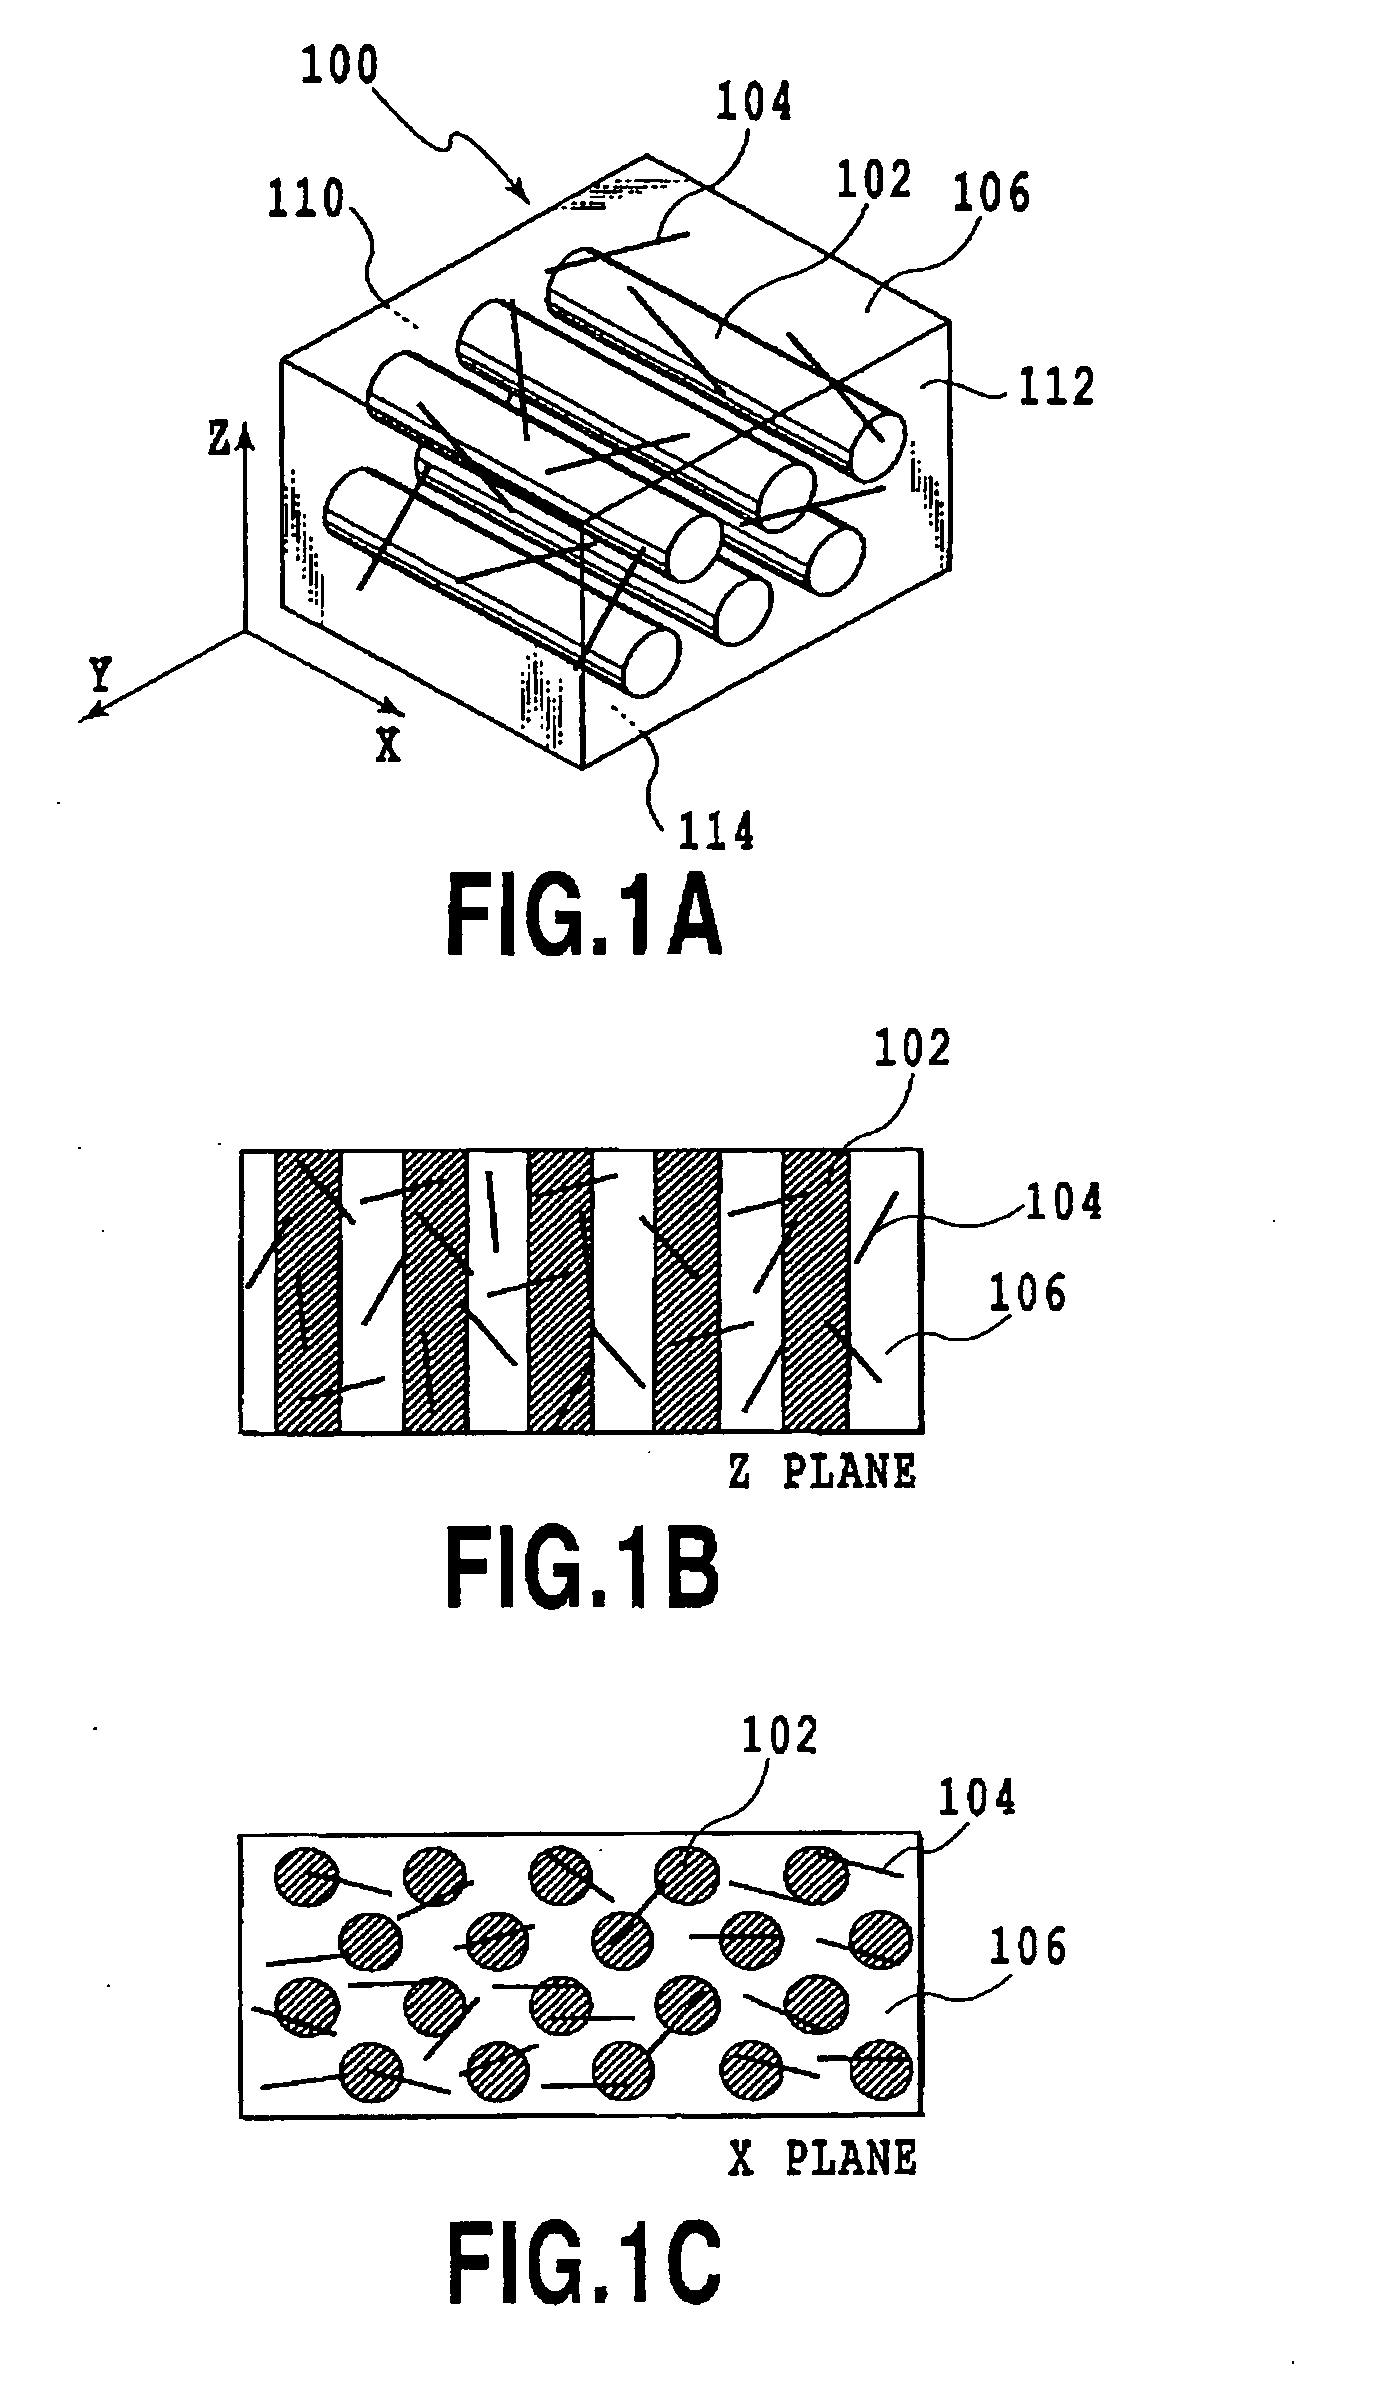 Metal-Based Composite Material Containing Both Micron-Size Carbon Fiber and Nano-Size Carbon Fiber